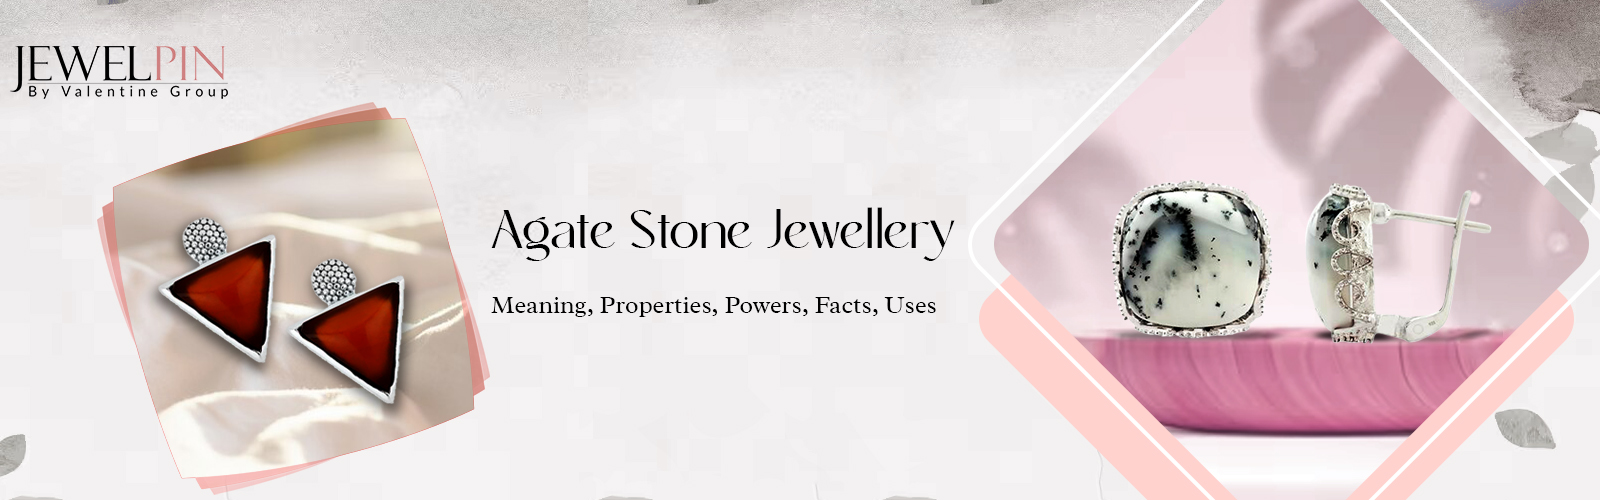 agate stone jewellery meaning properties, powers facts uses